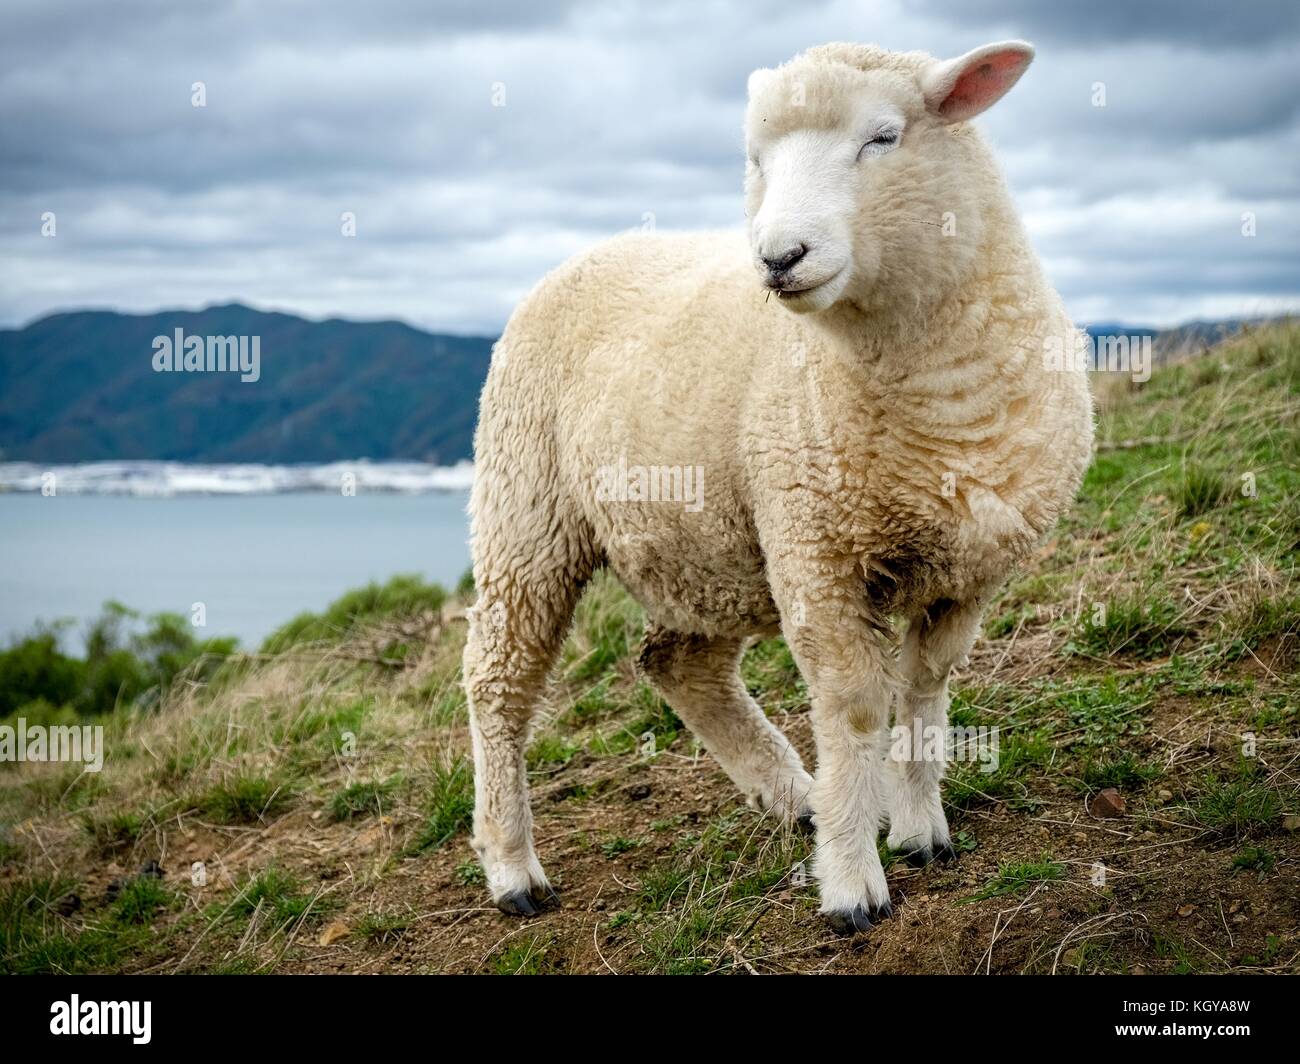 A Smiling Sheep on a Hill in Somes Island, New Zealand Stock Photo